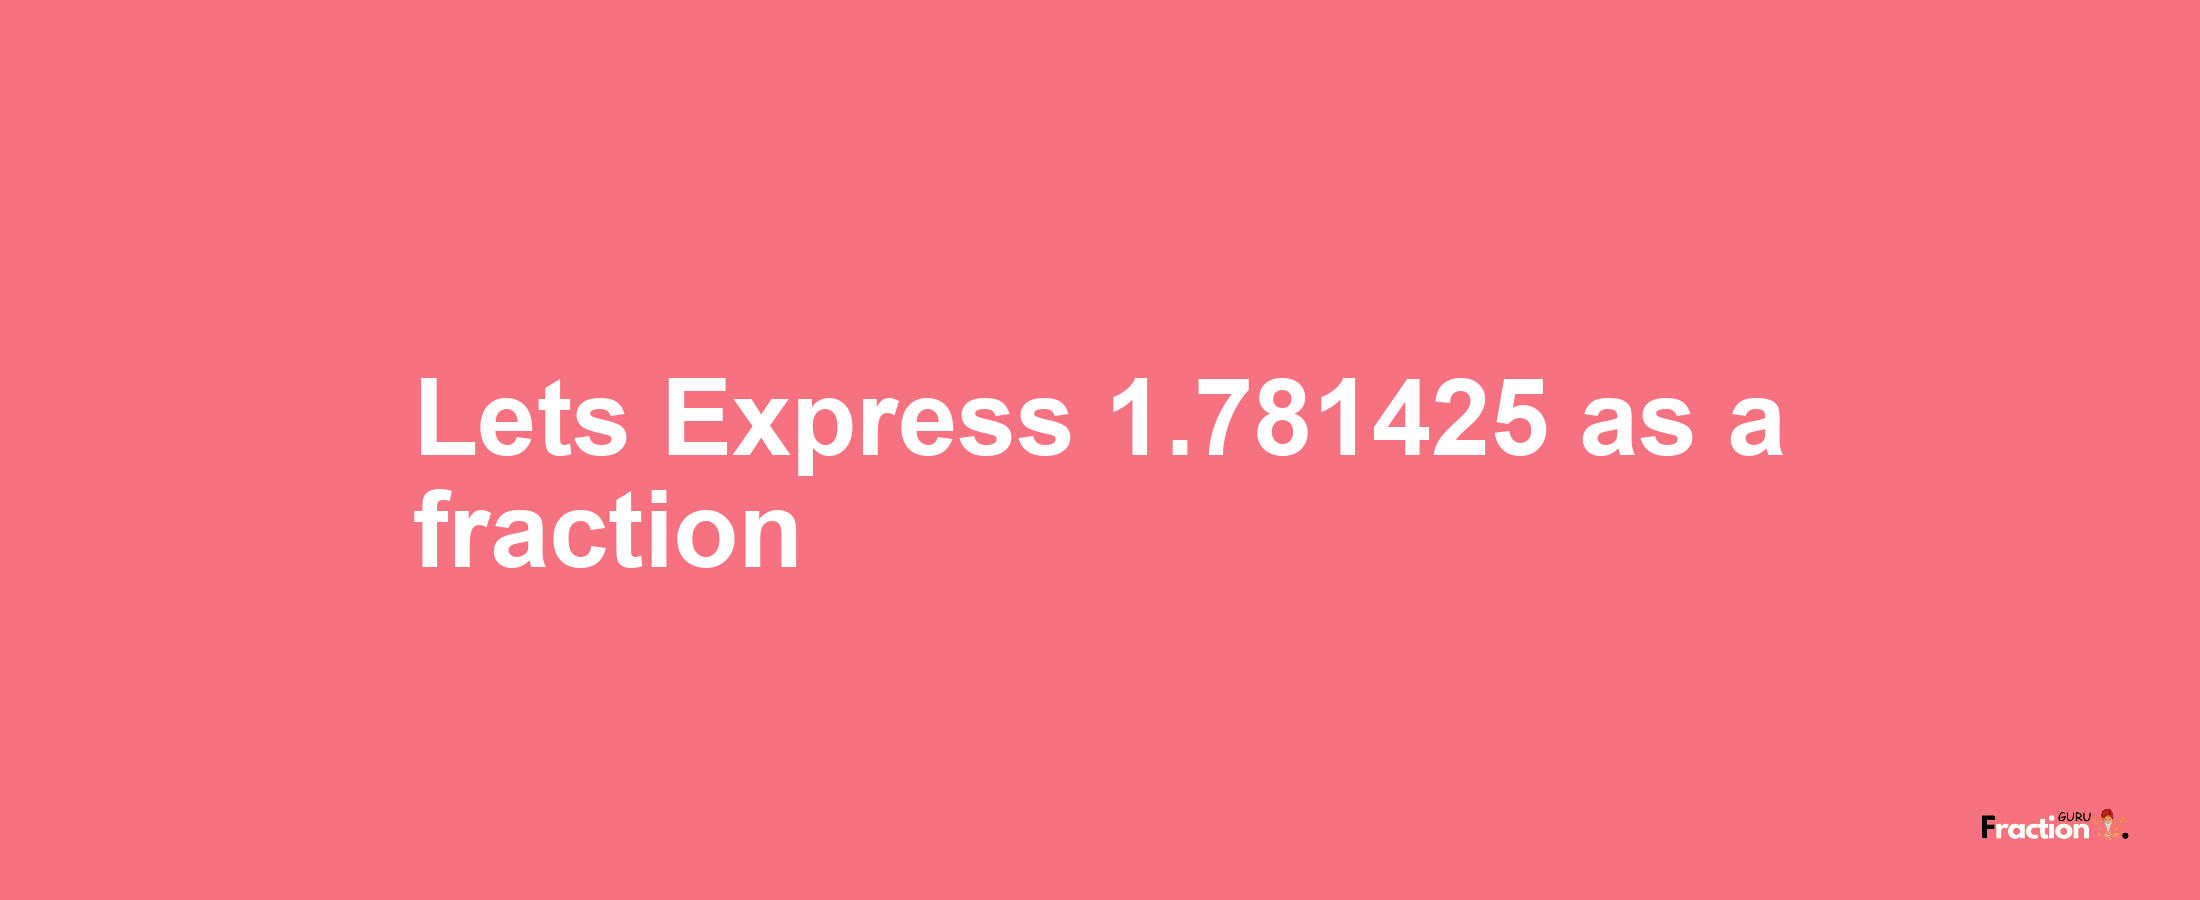 Lets Express 1.781425 as afraction